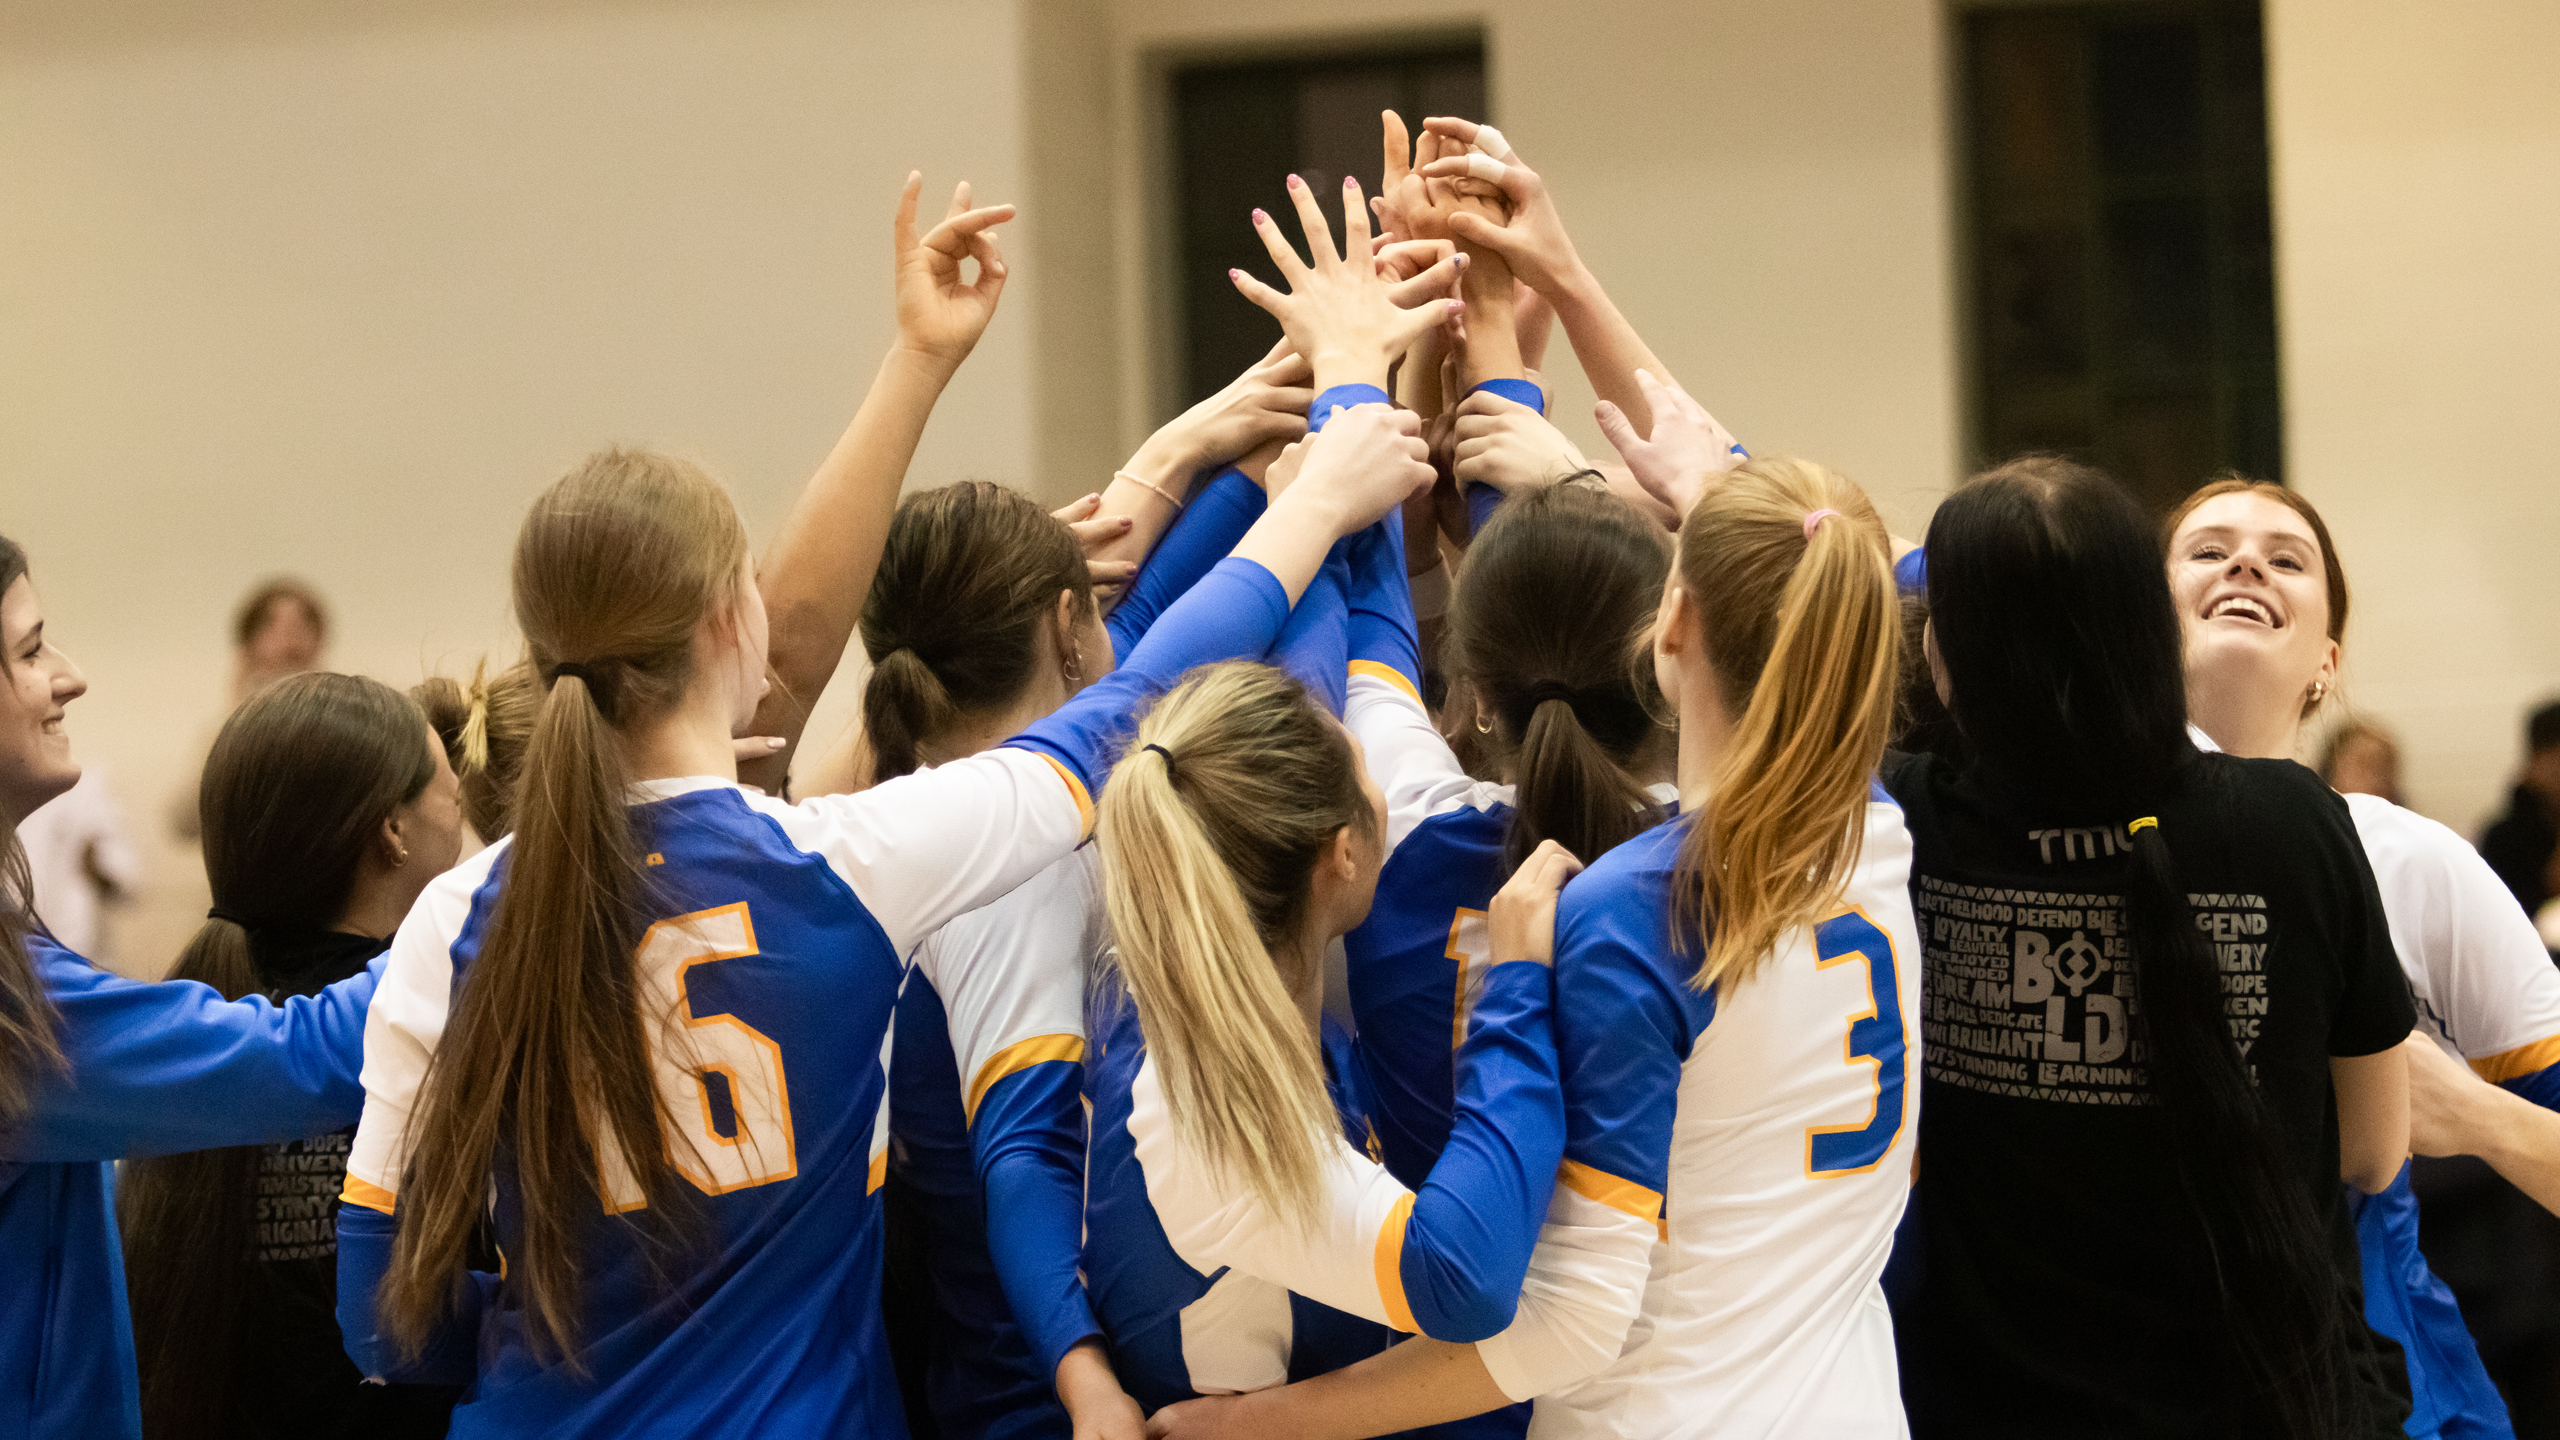 Members of the TMU Bold women's volleybal team put their hands in a circle to celebrate their win